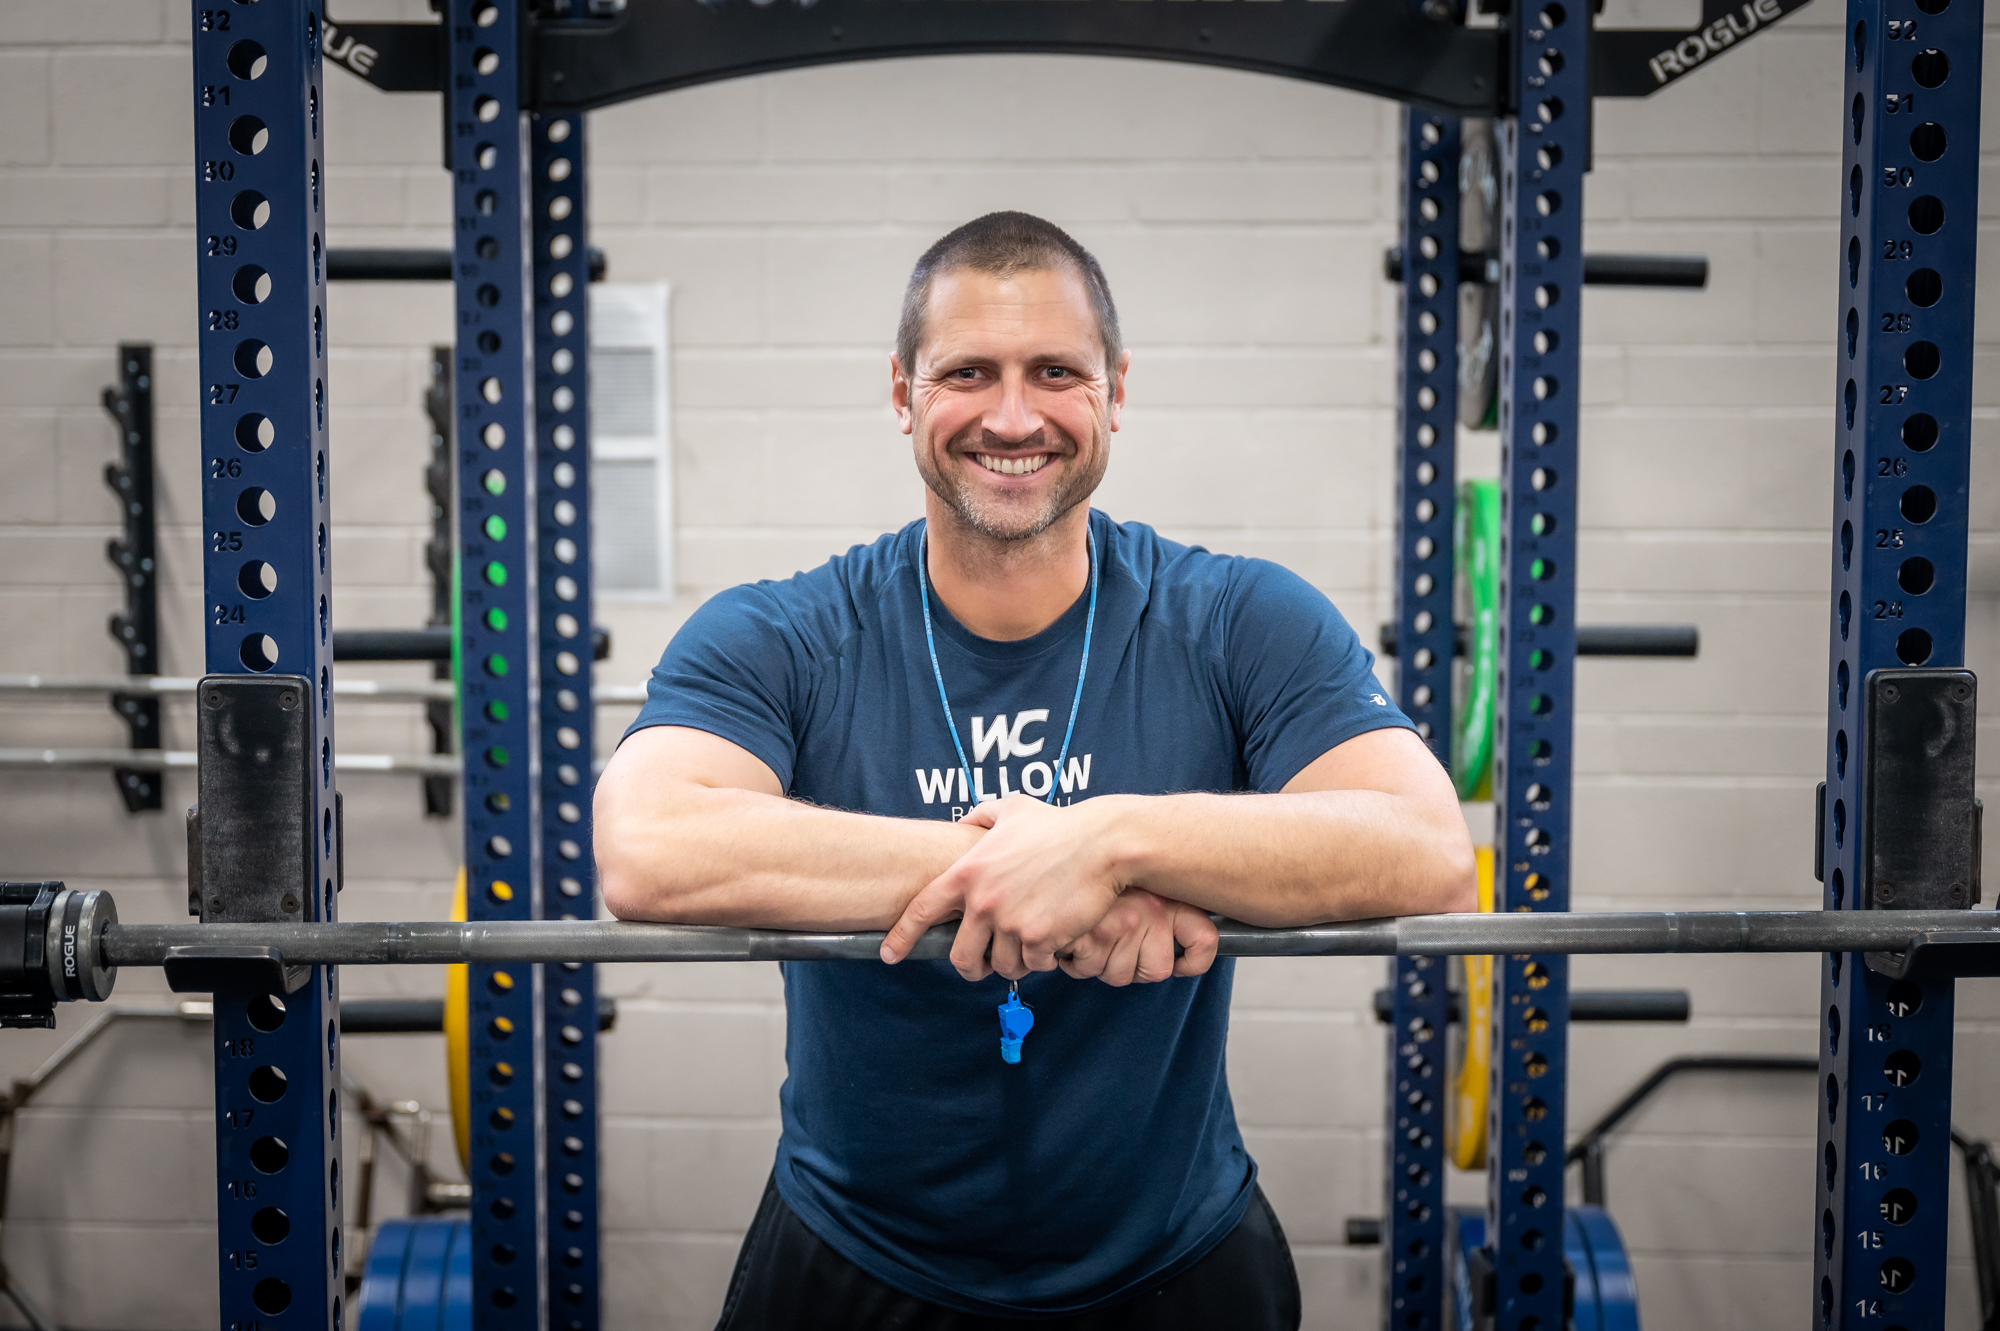 Clay Bewley M.Ed. & CSCS, Strength and Conditioning Coordinator at Willow Canyon High School